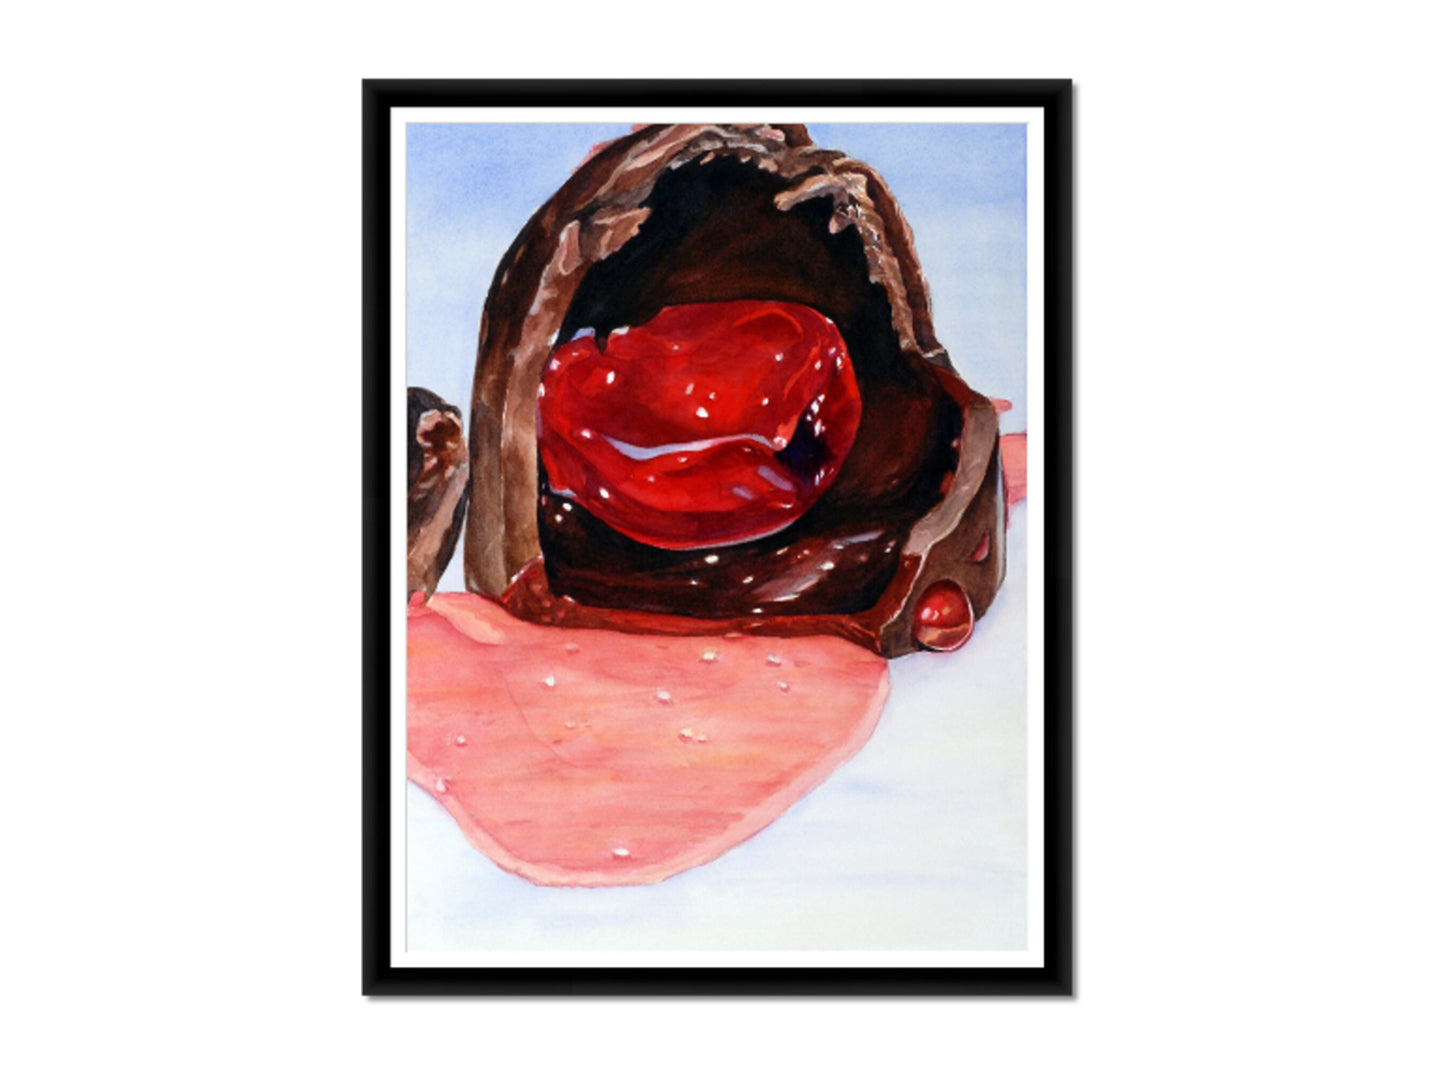 Retro Wall Art. Candy Poster, Watercolor Painting, Large Wall Art, Chocolate Covered Cherry, Large Canvas Art